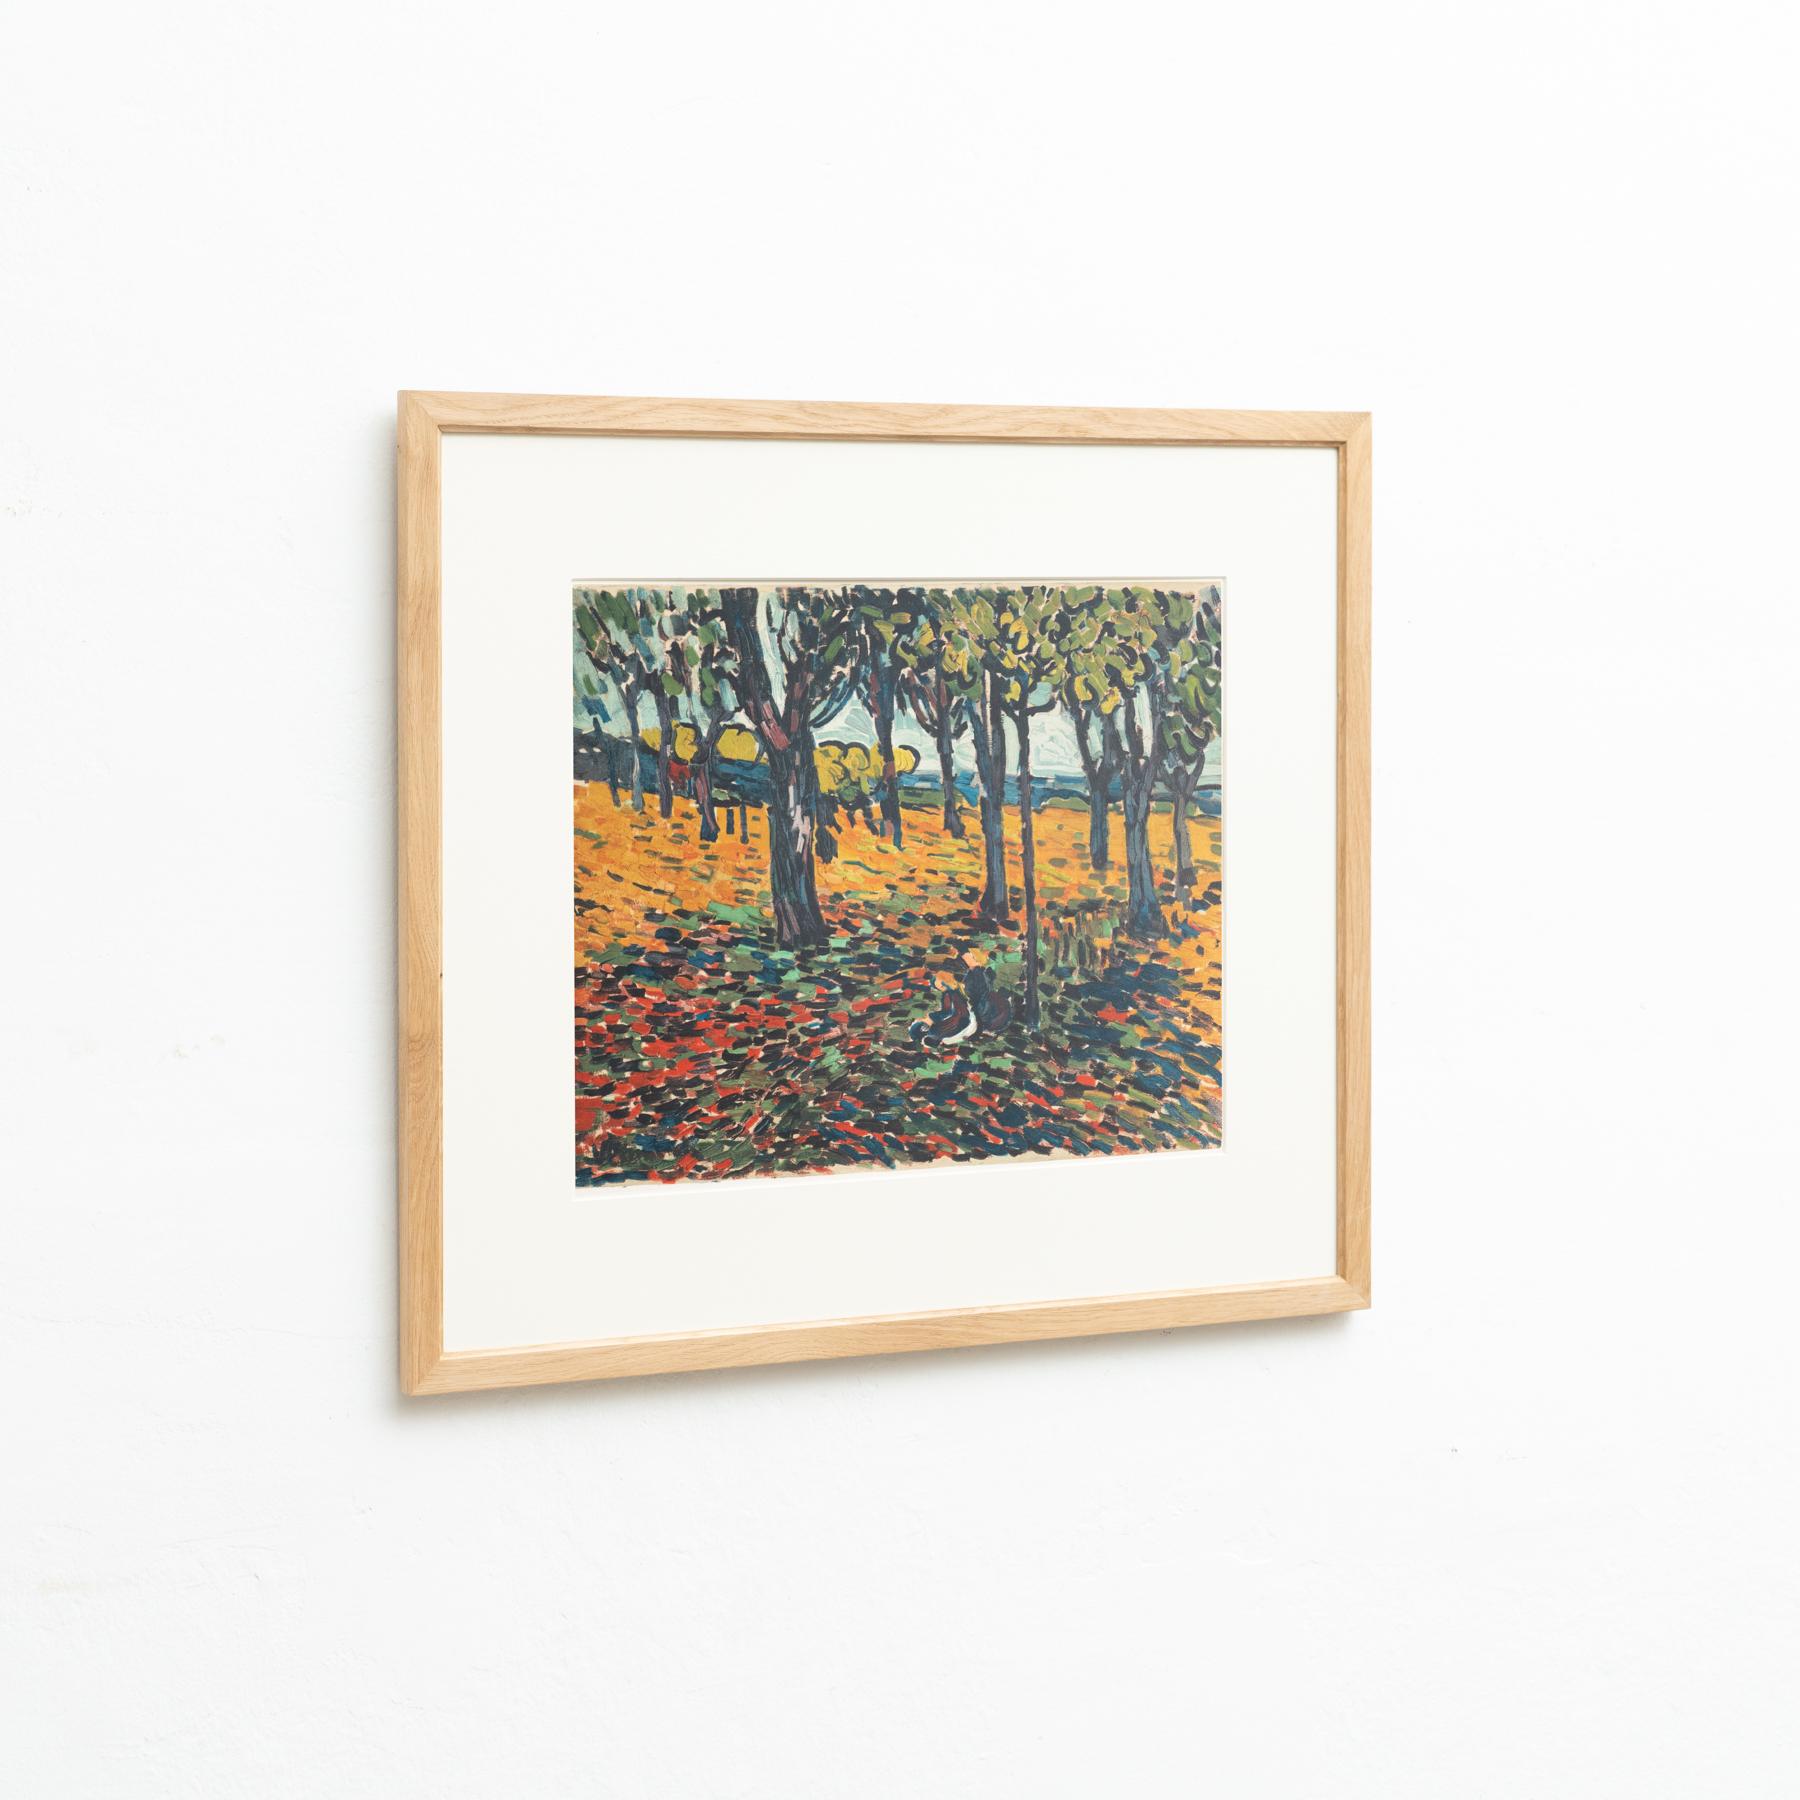 Modern Vlamnick Framed 'Woods in Chatou' Color Lithography, circa 1972 For Sale